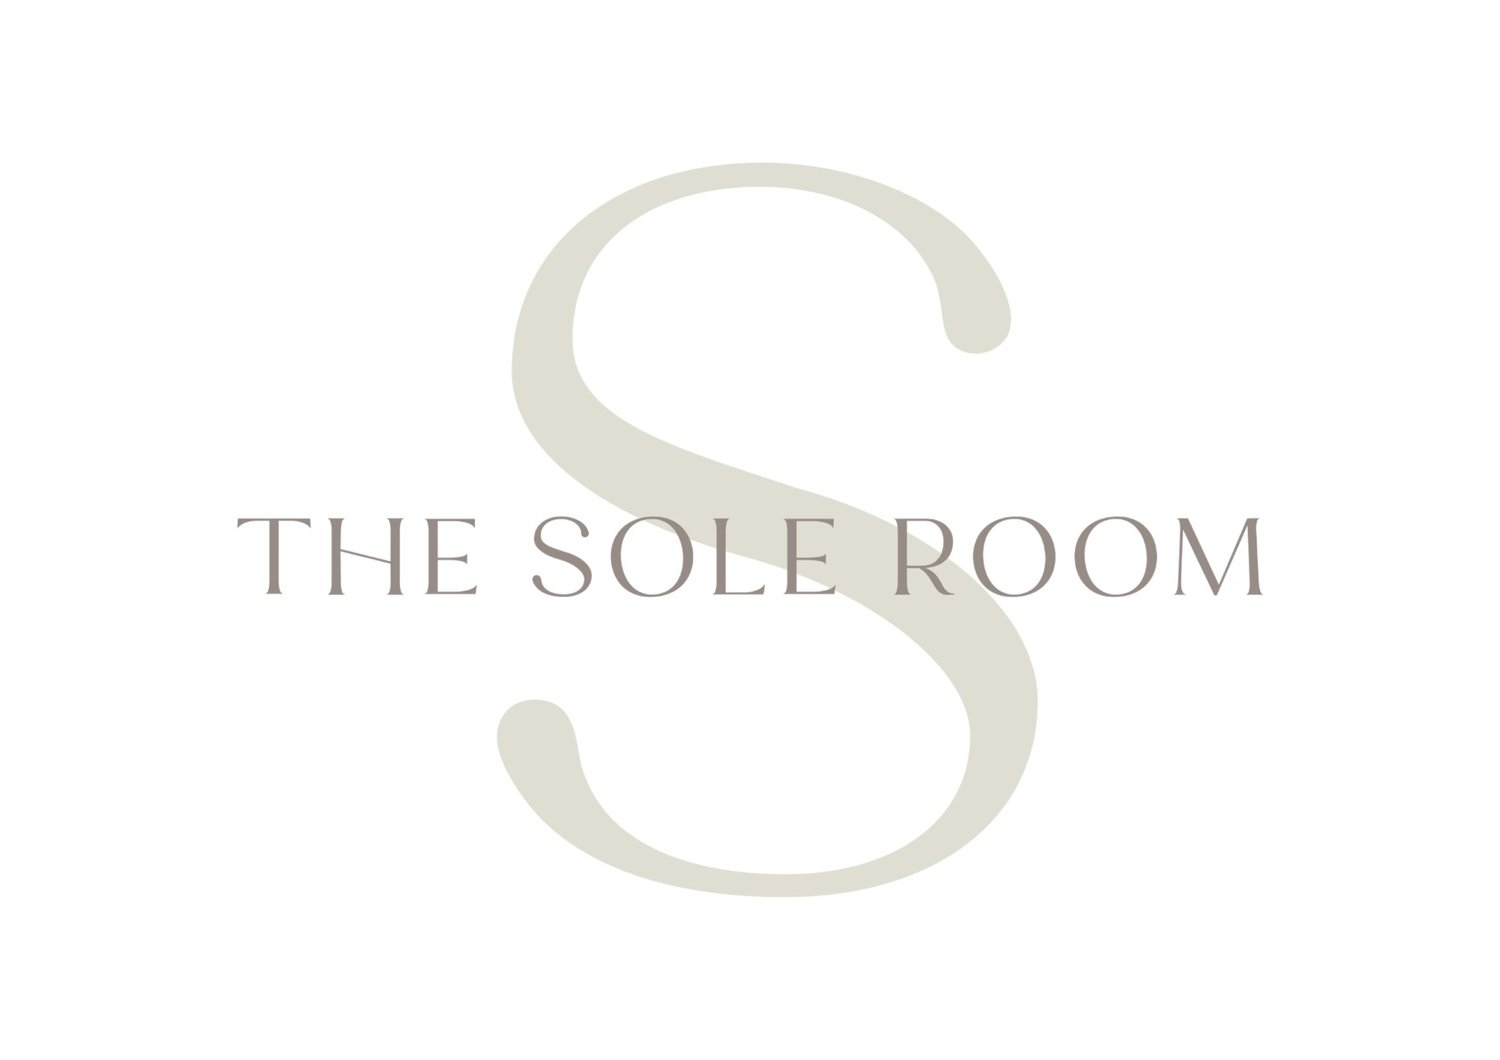 The Sole Room